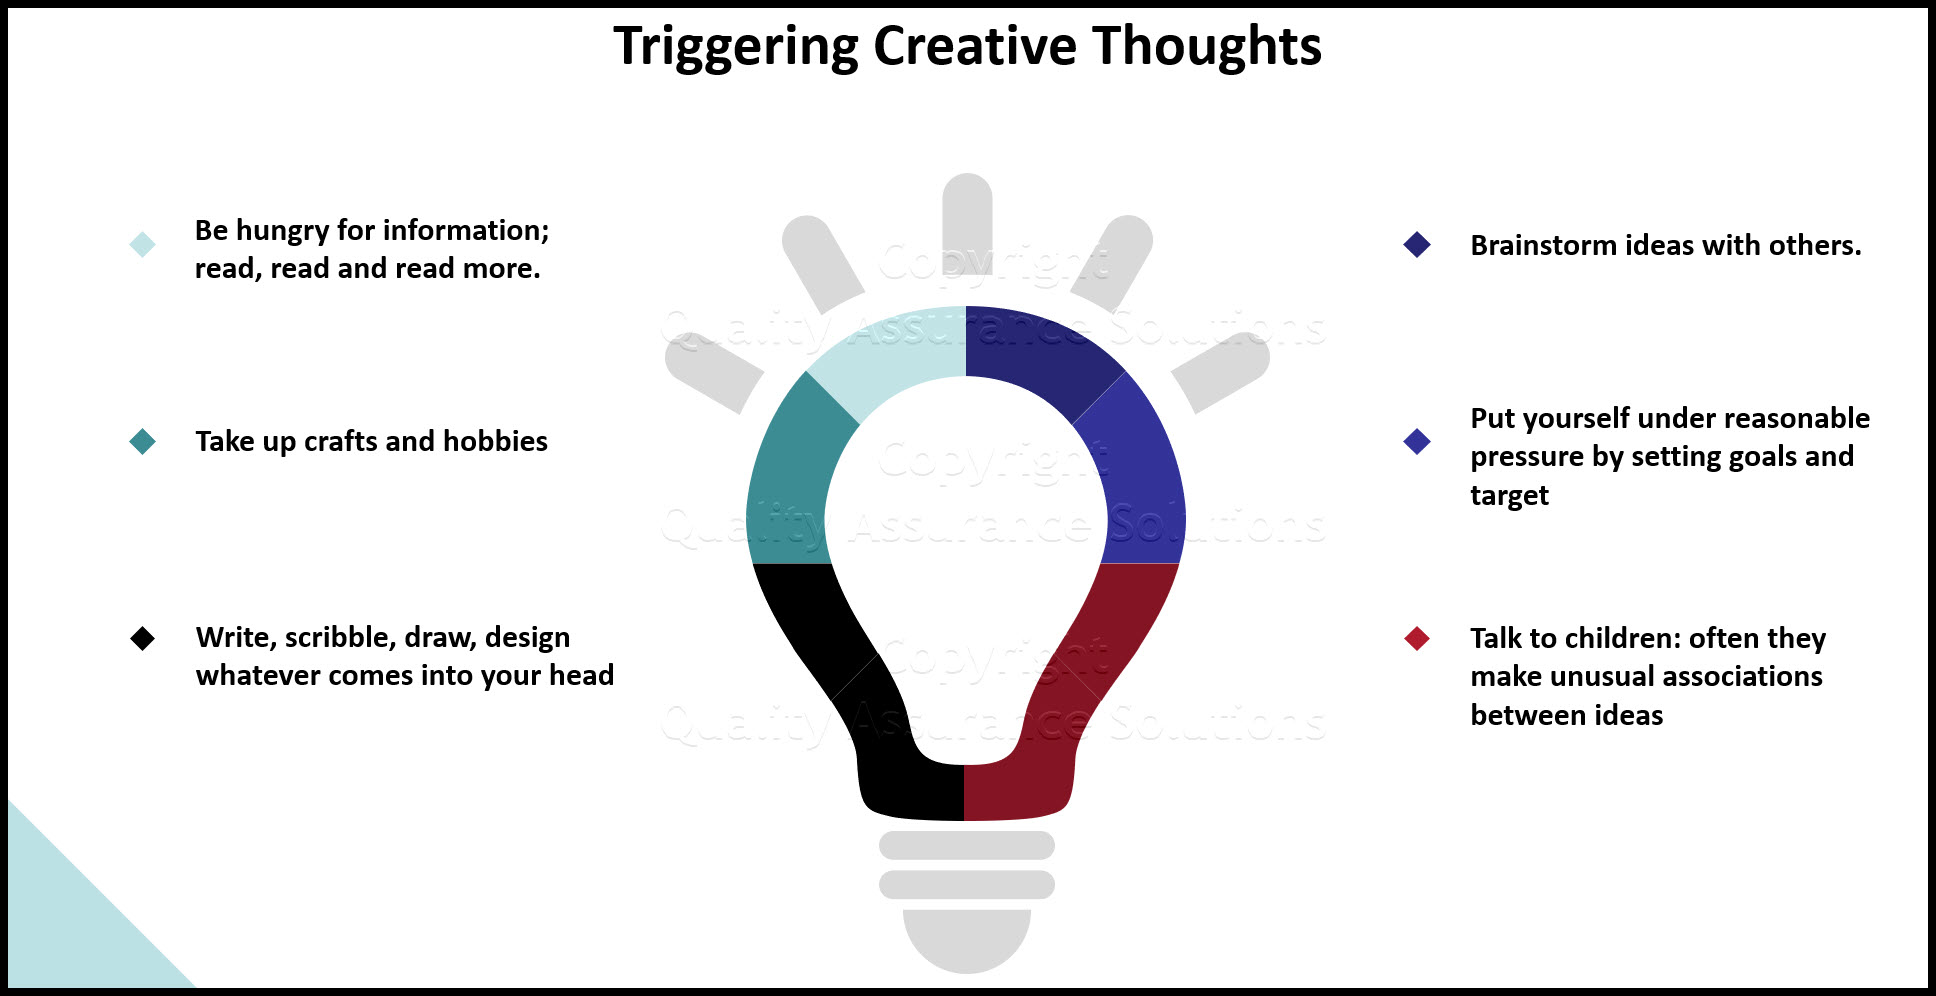 Learn an exercise and triggers for creative thinking